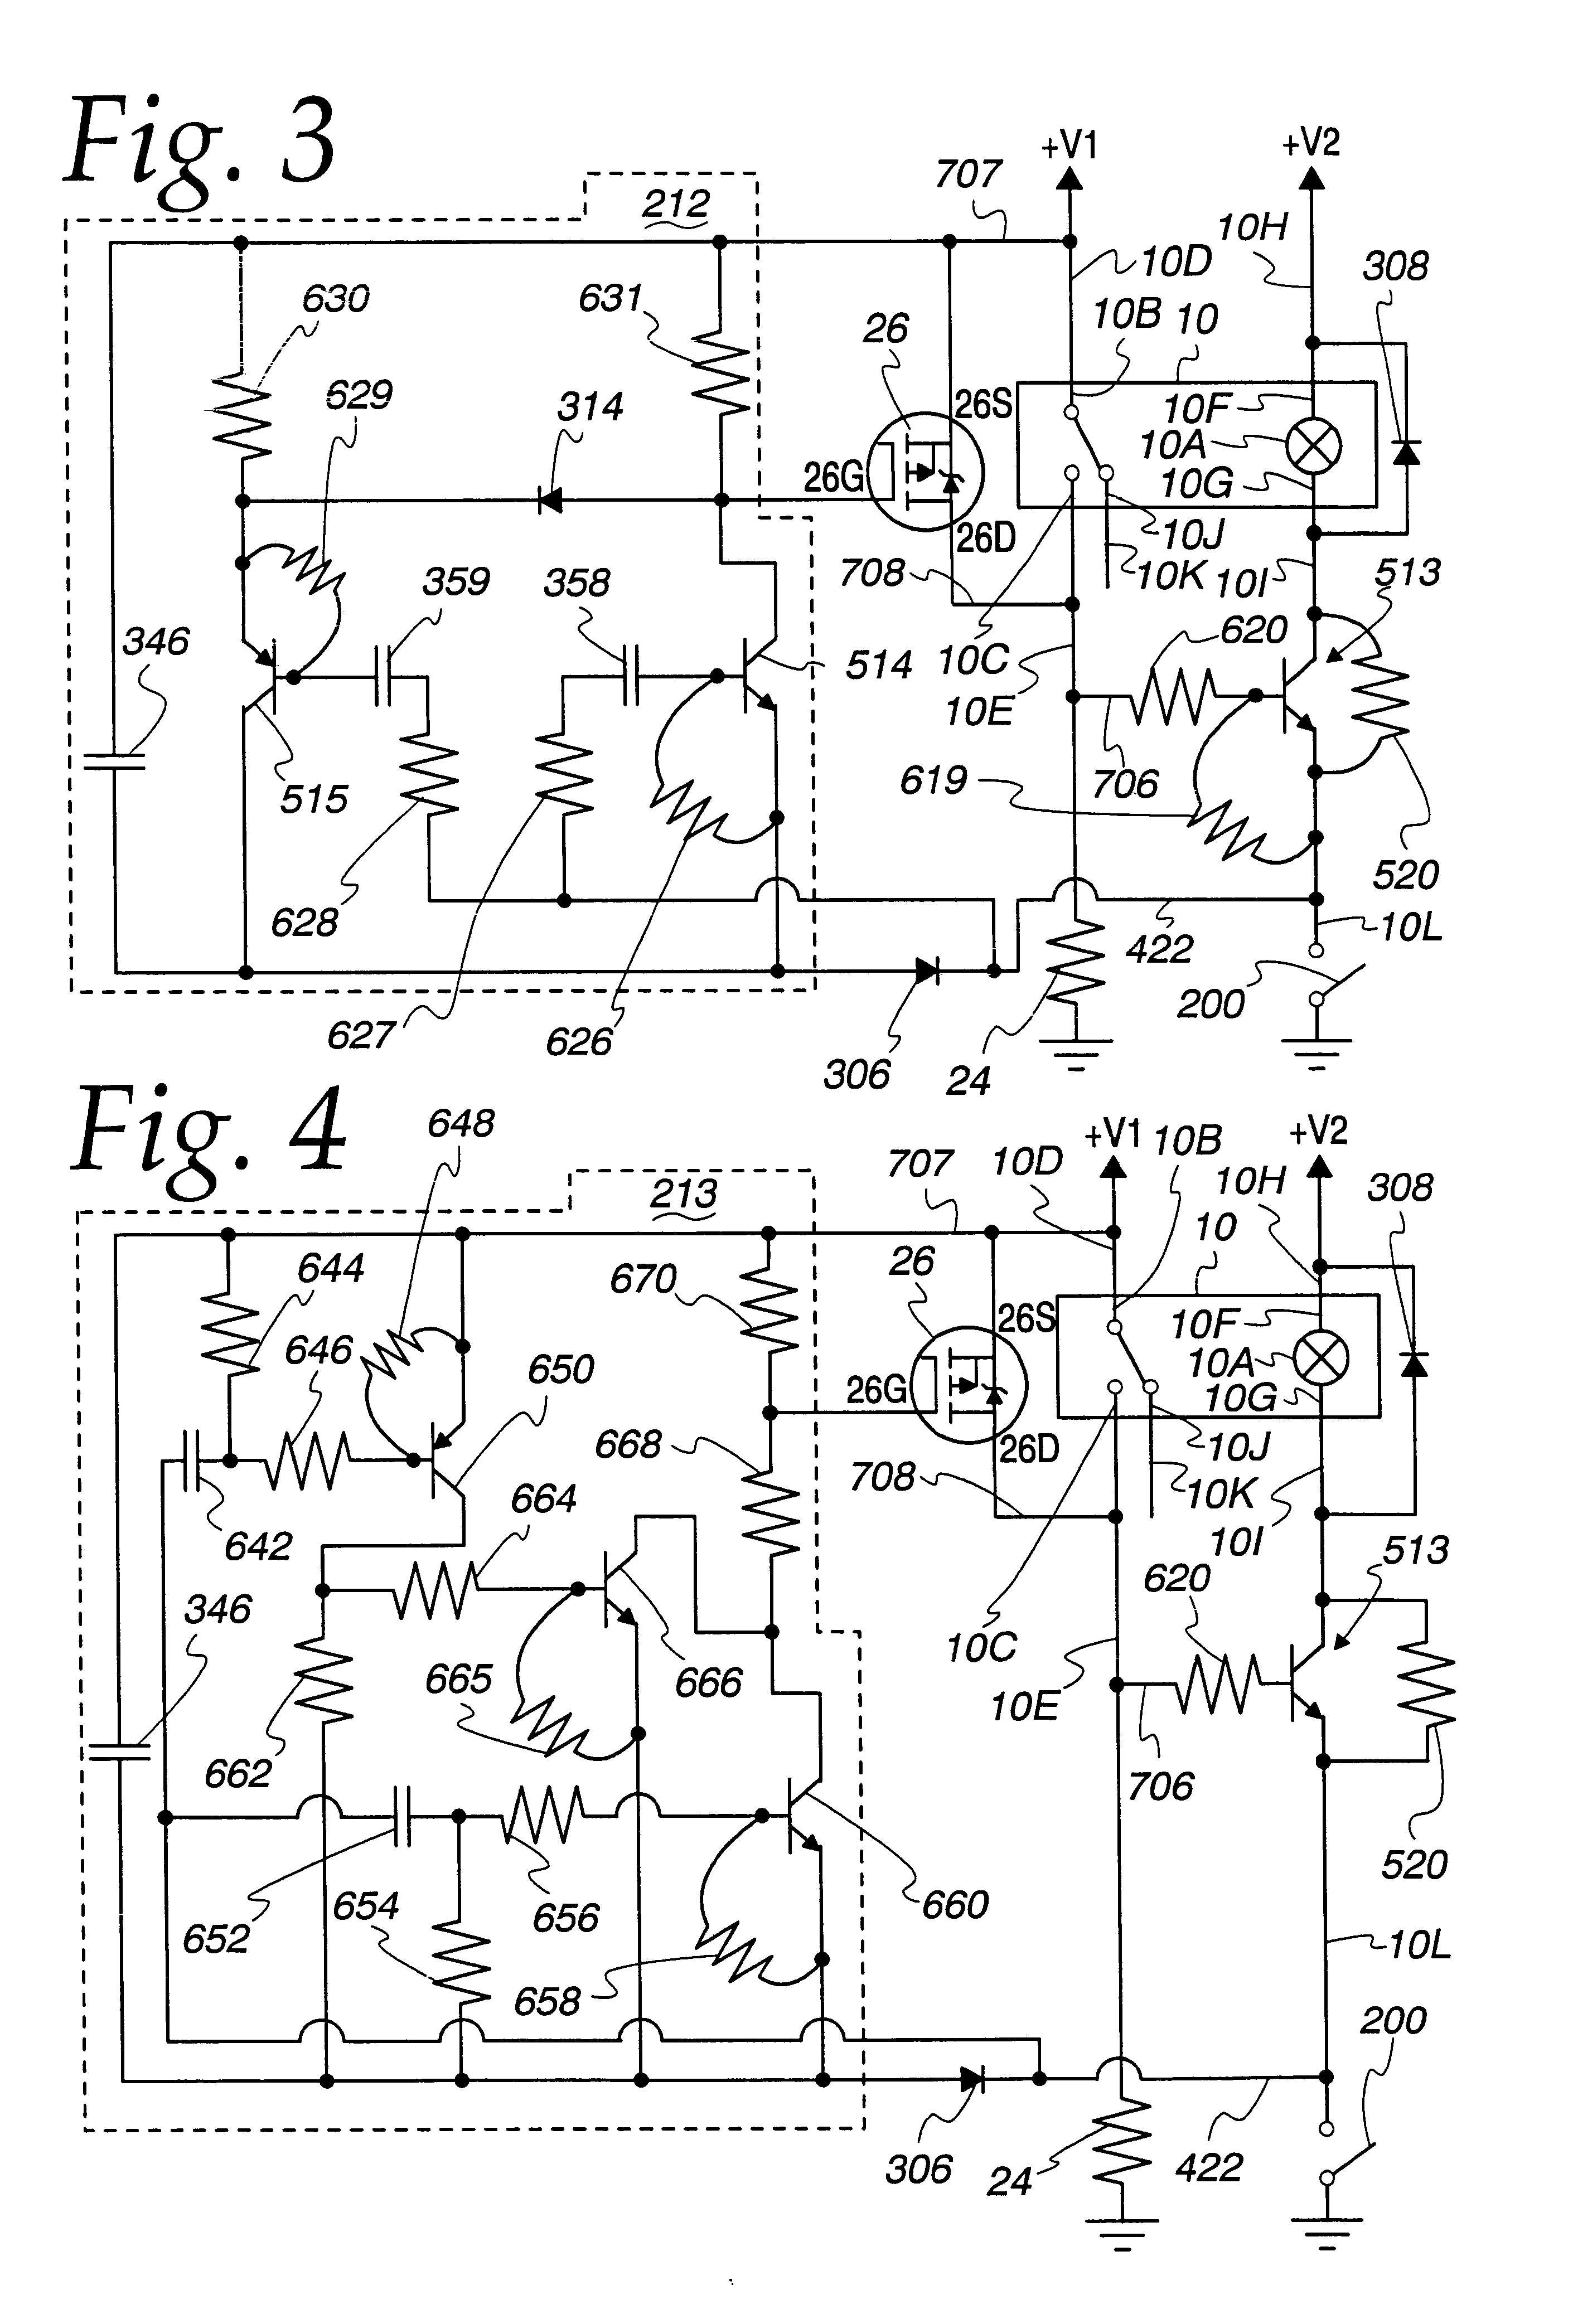 Circuit for operating voltage range extension for a relay